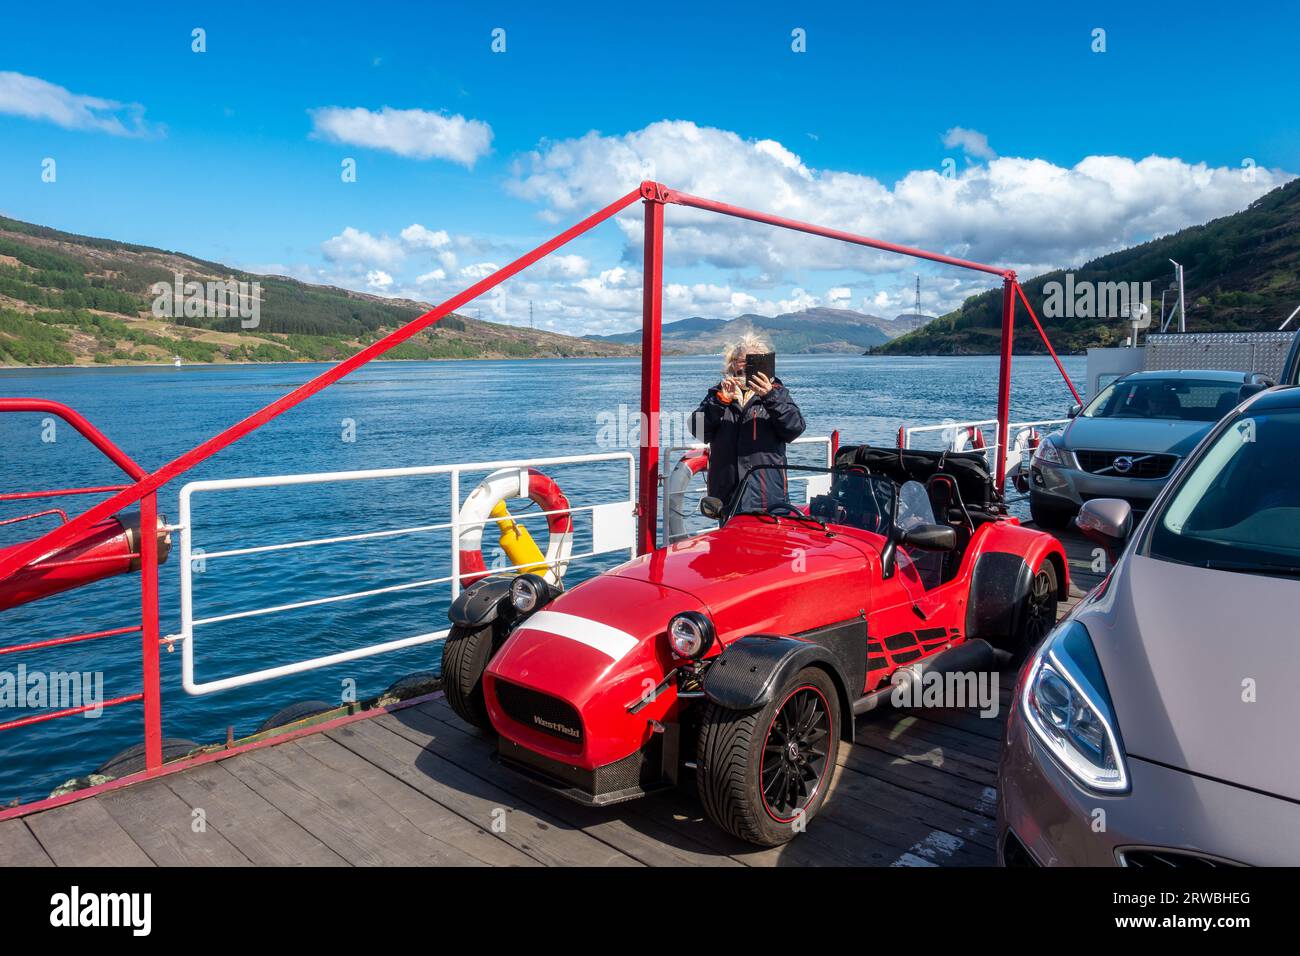 Tourist taking a photo on the Glenelg to Kylerhea Ferry on the Isle of Skye on tour in a red kit car in the Scottish Highlands, Scotland. Stock Photo